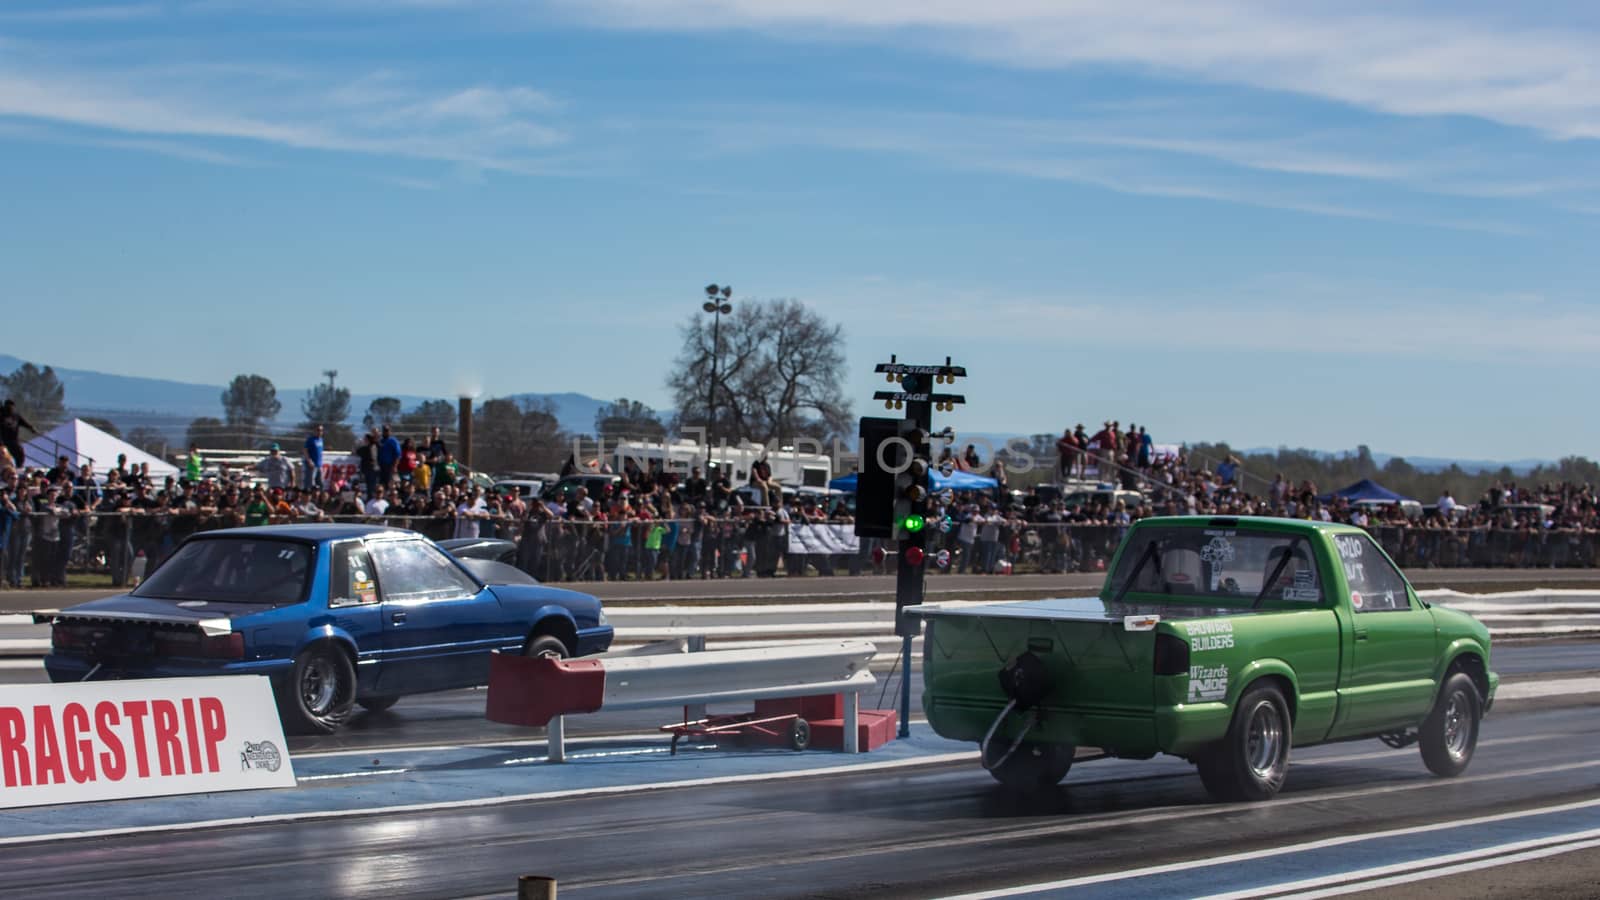 Redding, California: A small green pickup truck and a blue hot rod get the green light to start during a drag light.
Photo taken on: February 13th, 2016